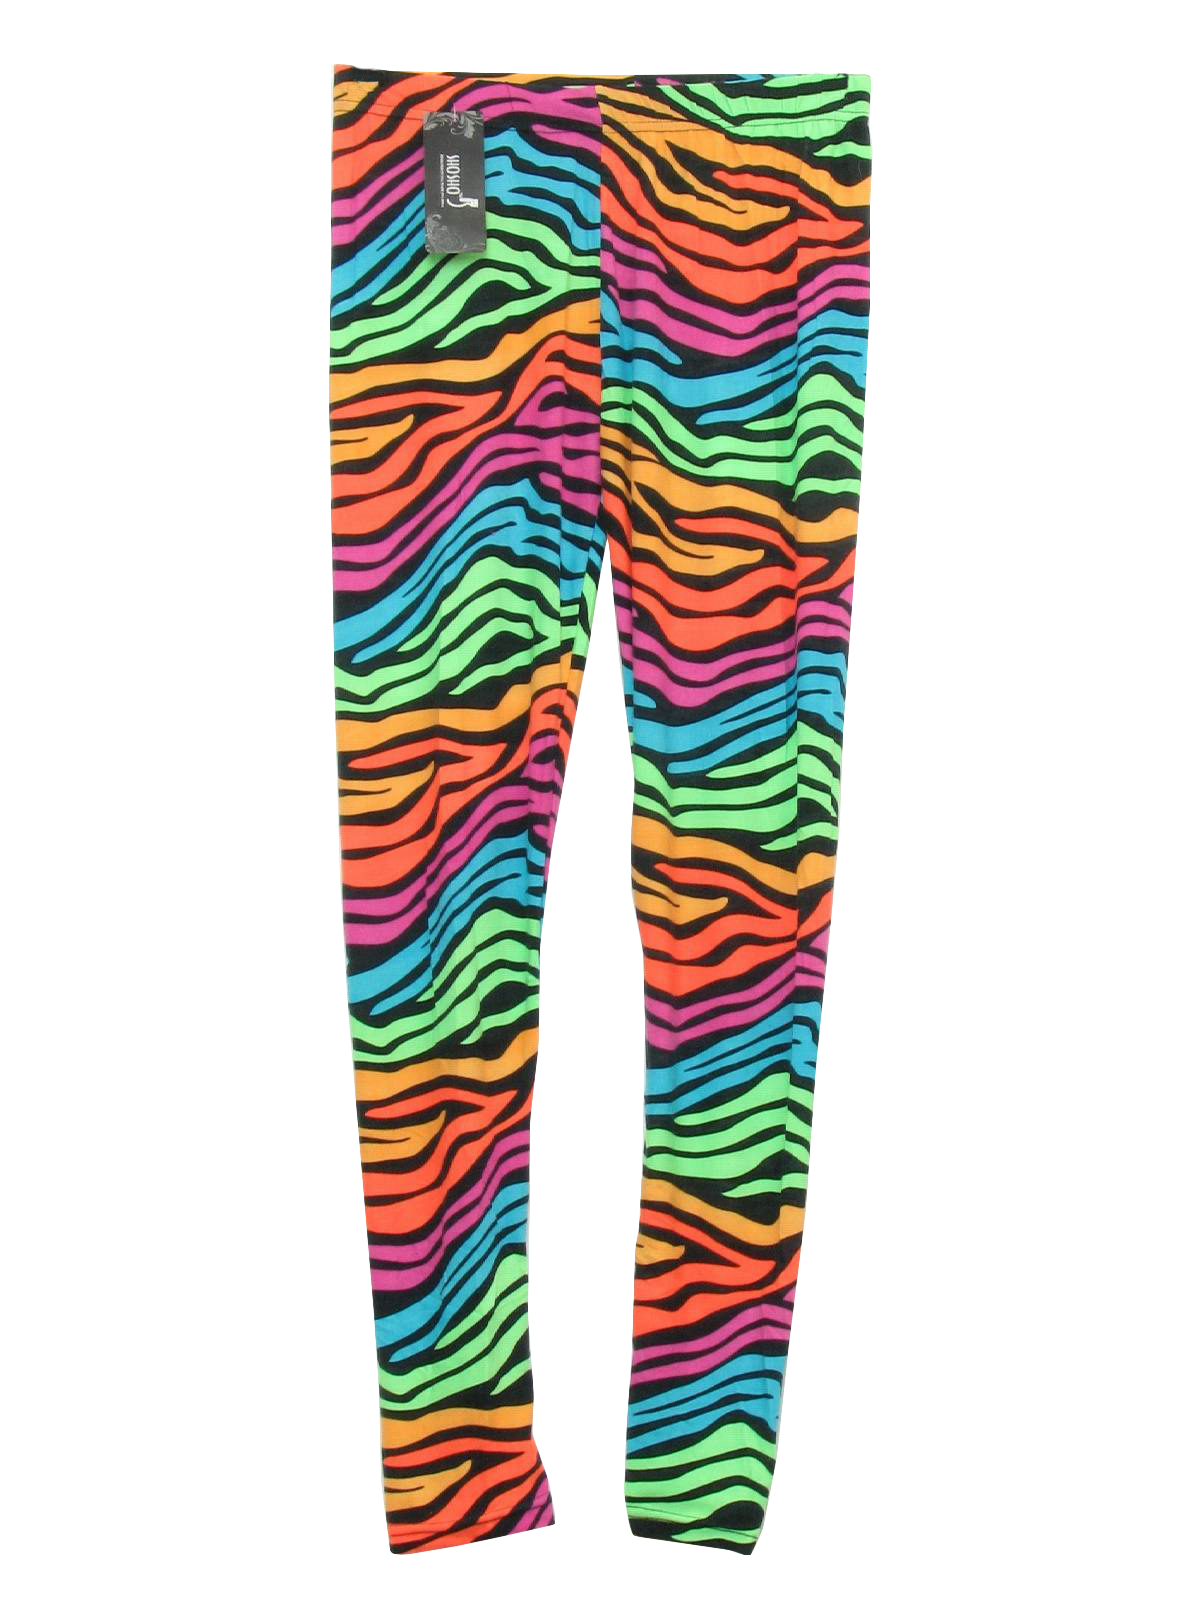 Vintage 1980's Pants: 80s style (made recently) -Missing Label- Womens  black, orange, green, teal, pink and light orange zebra striped, stretchy  polyester spandex totally 80s leggings pants with elastic waistband. Made  for